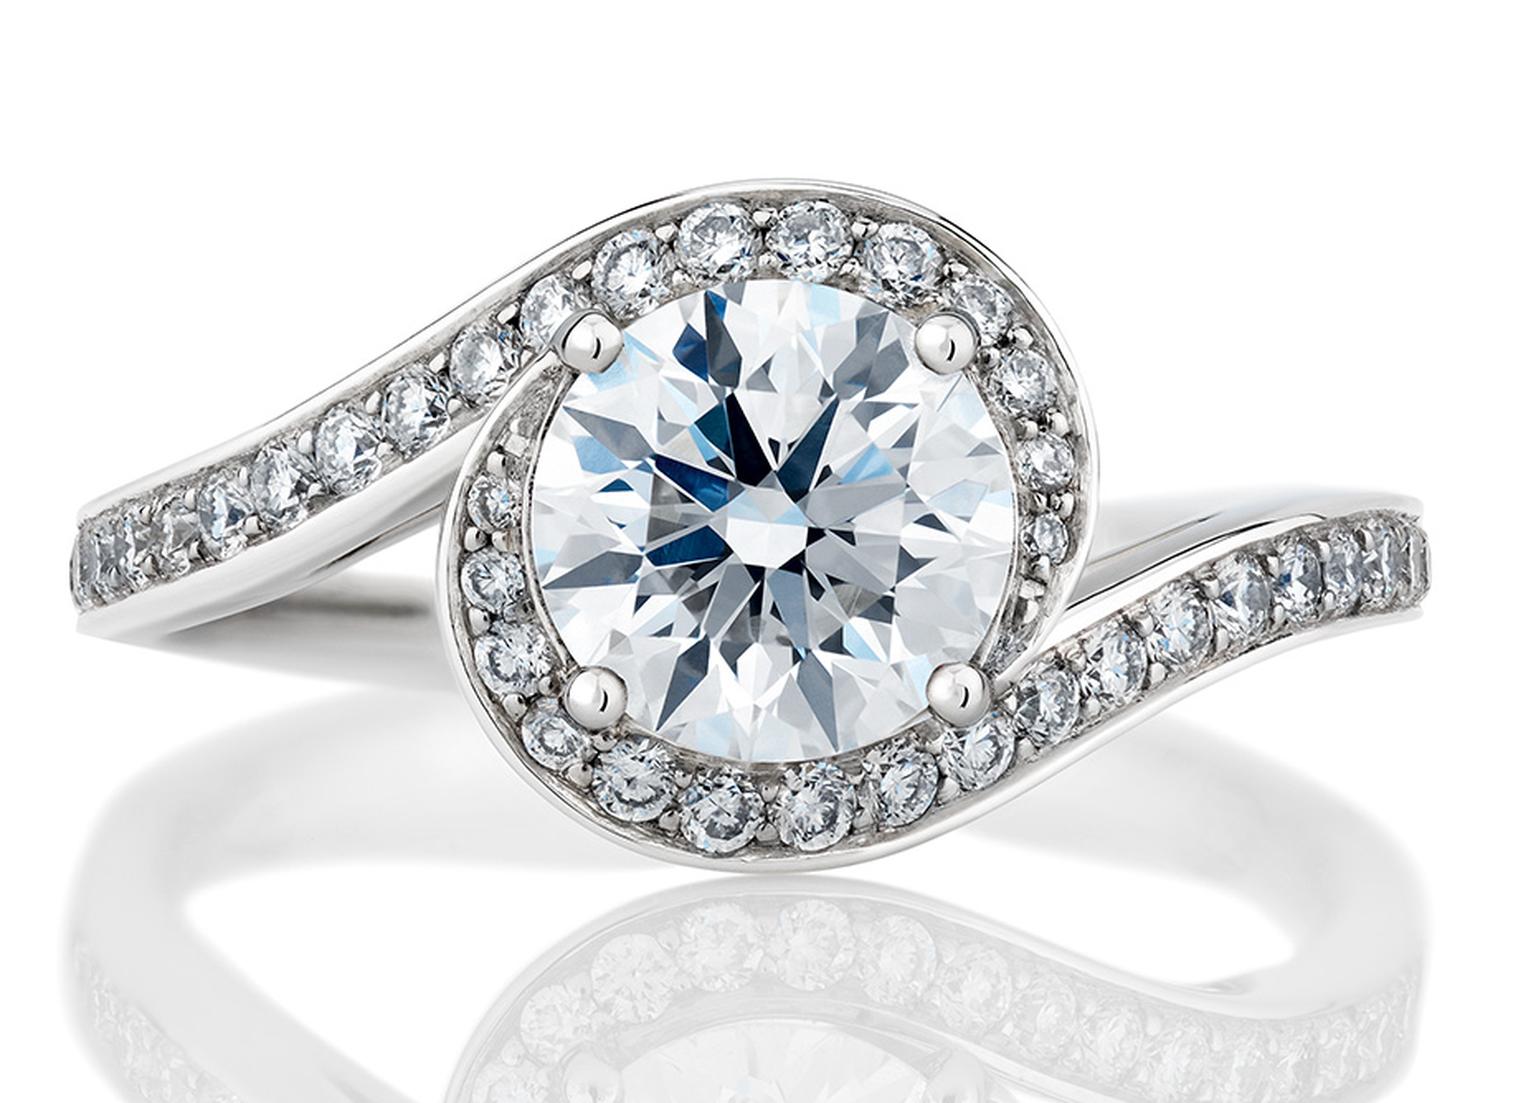 De Beers' Caress solitaire engagement ring incorporates a curved diamond pave´ that appears to embrace the central diamond